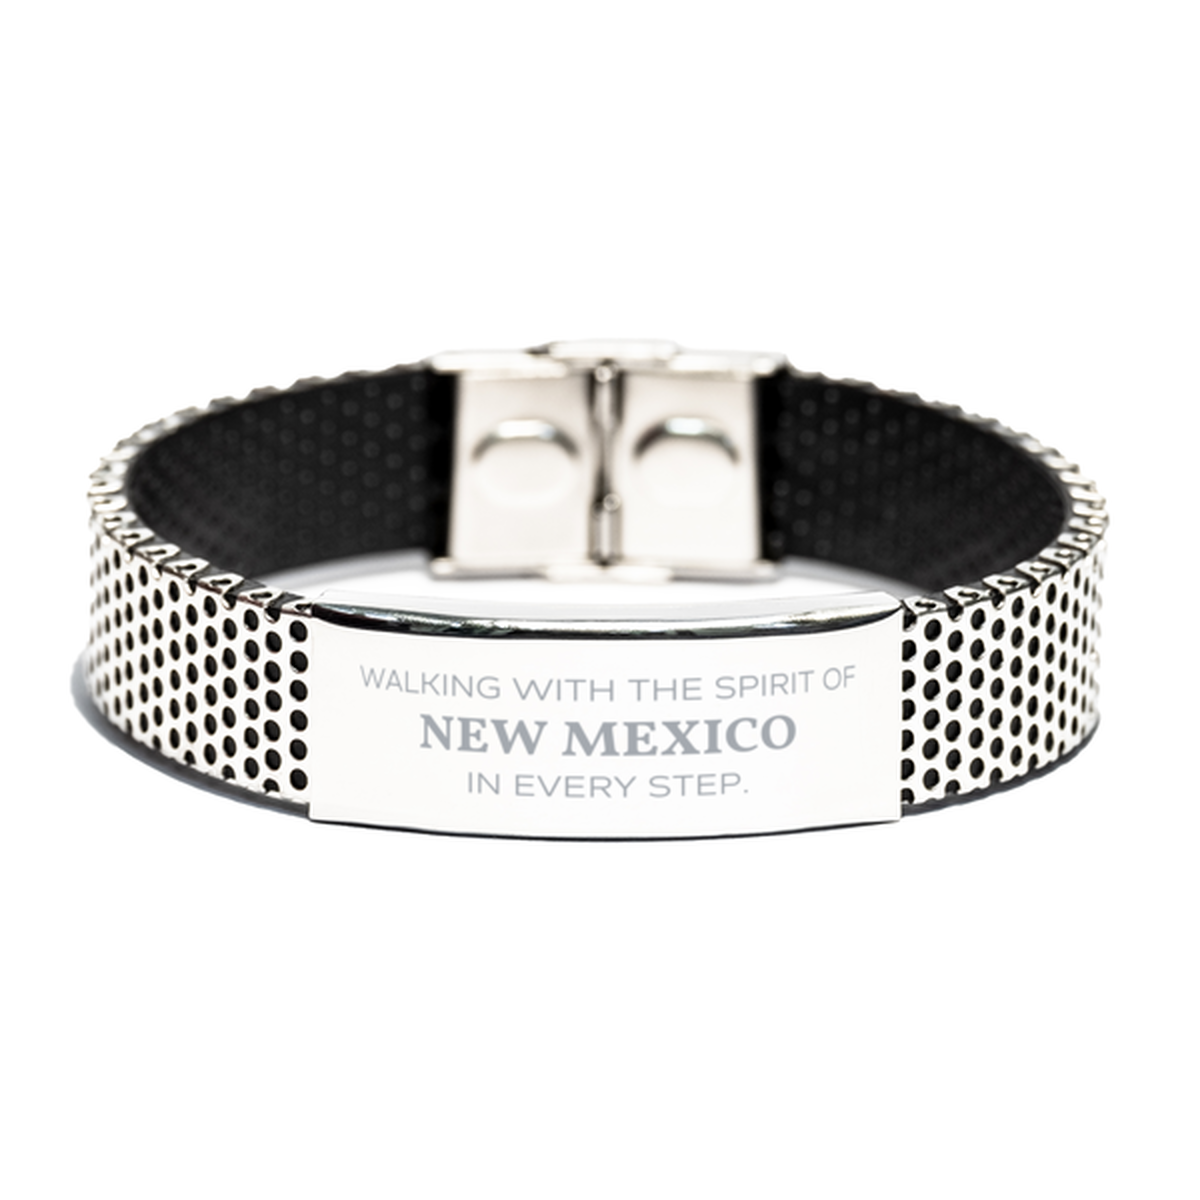 New Mexico Gifts, Walking with the spirit, Love New Mexico Birthday Christmas Stainless Steel Bracelet For New Mexico People, Men, Women, Friends